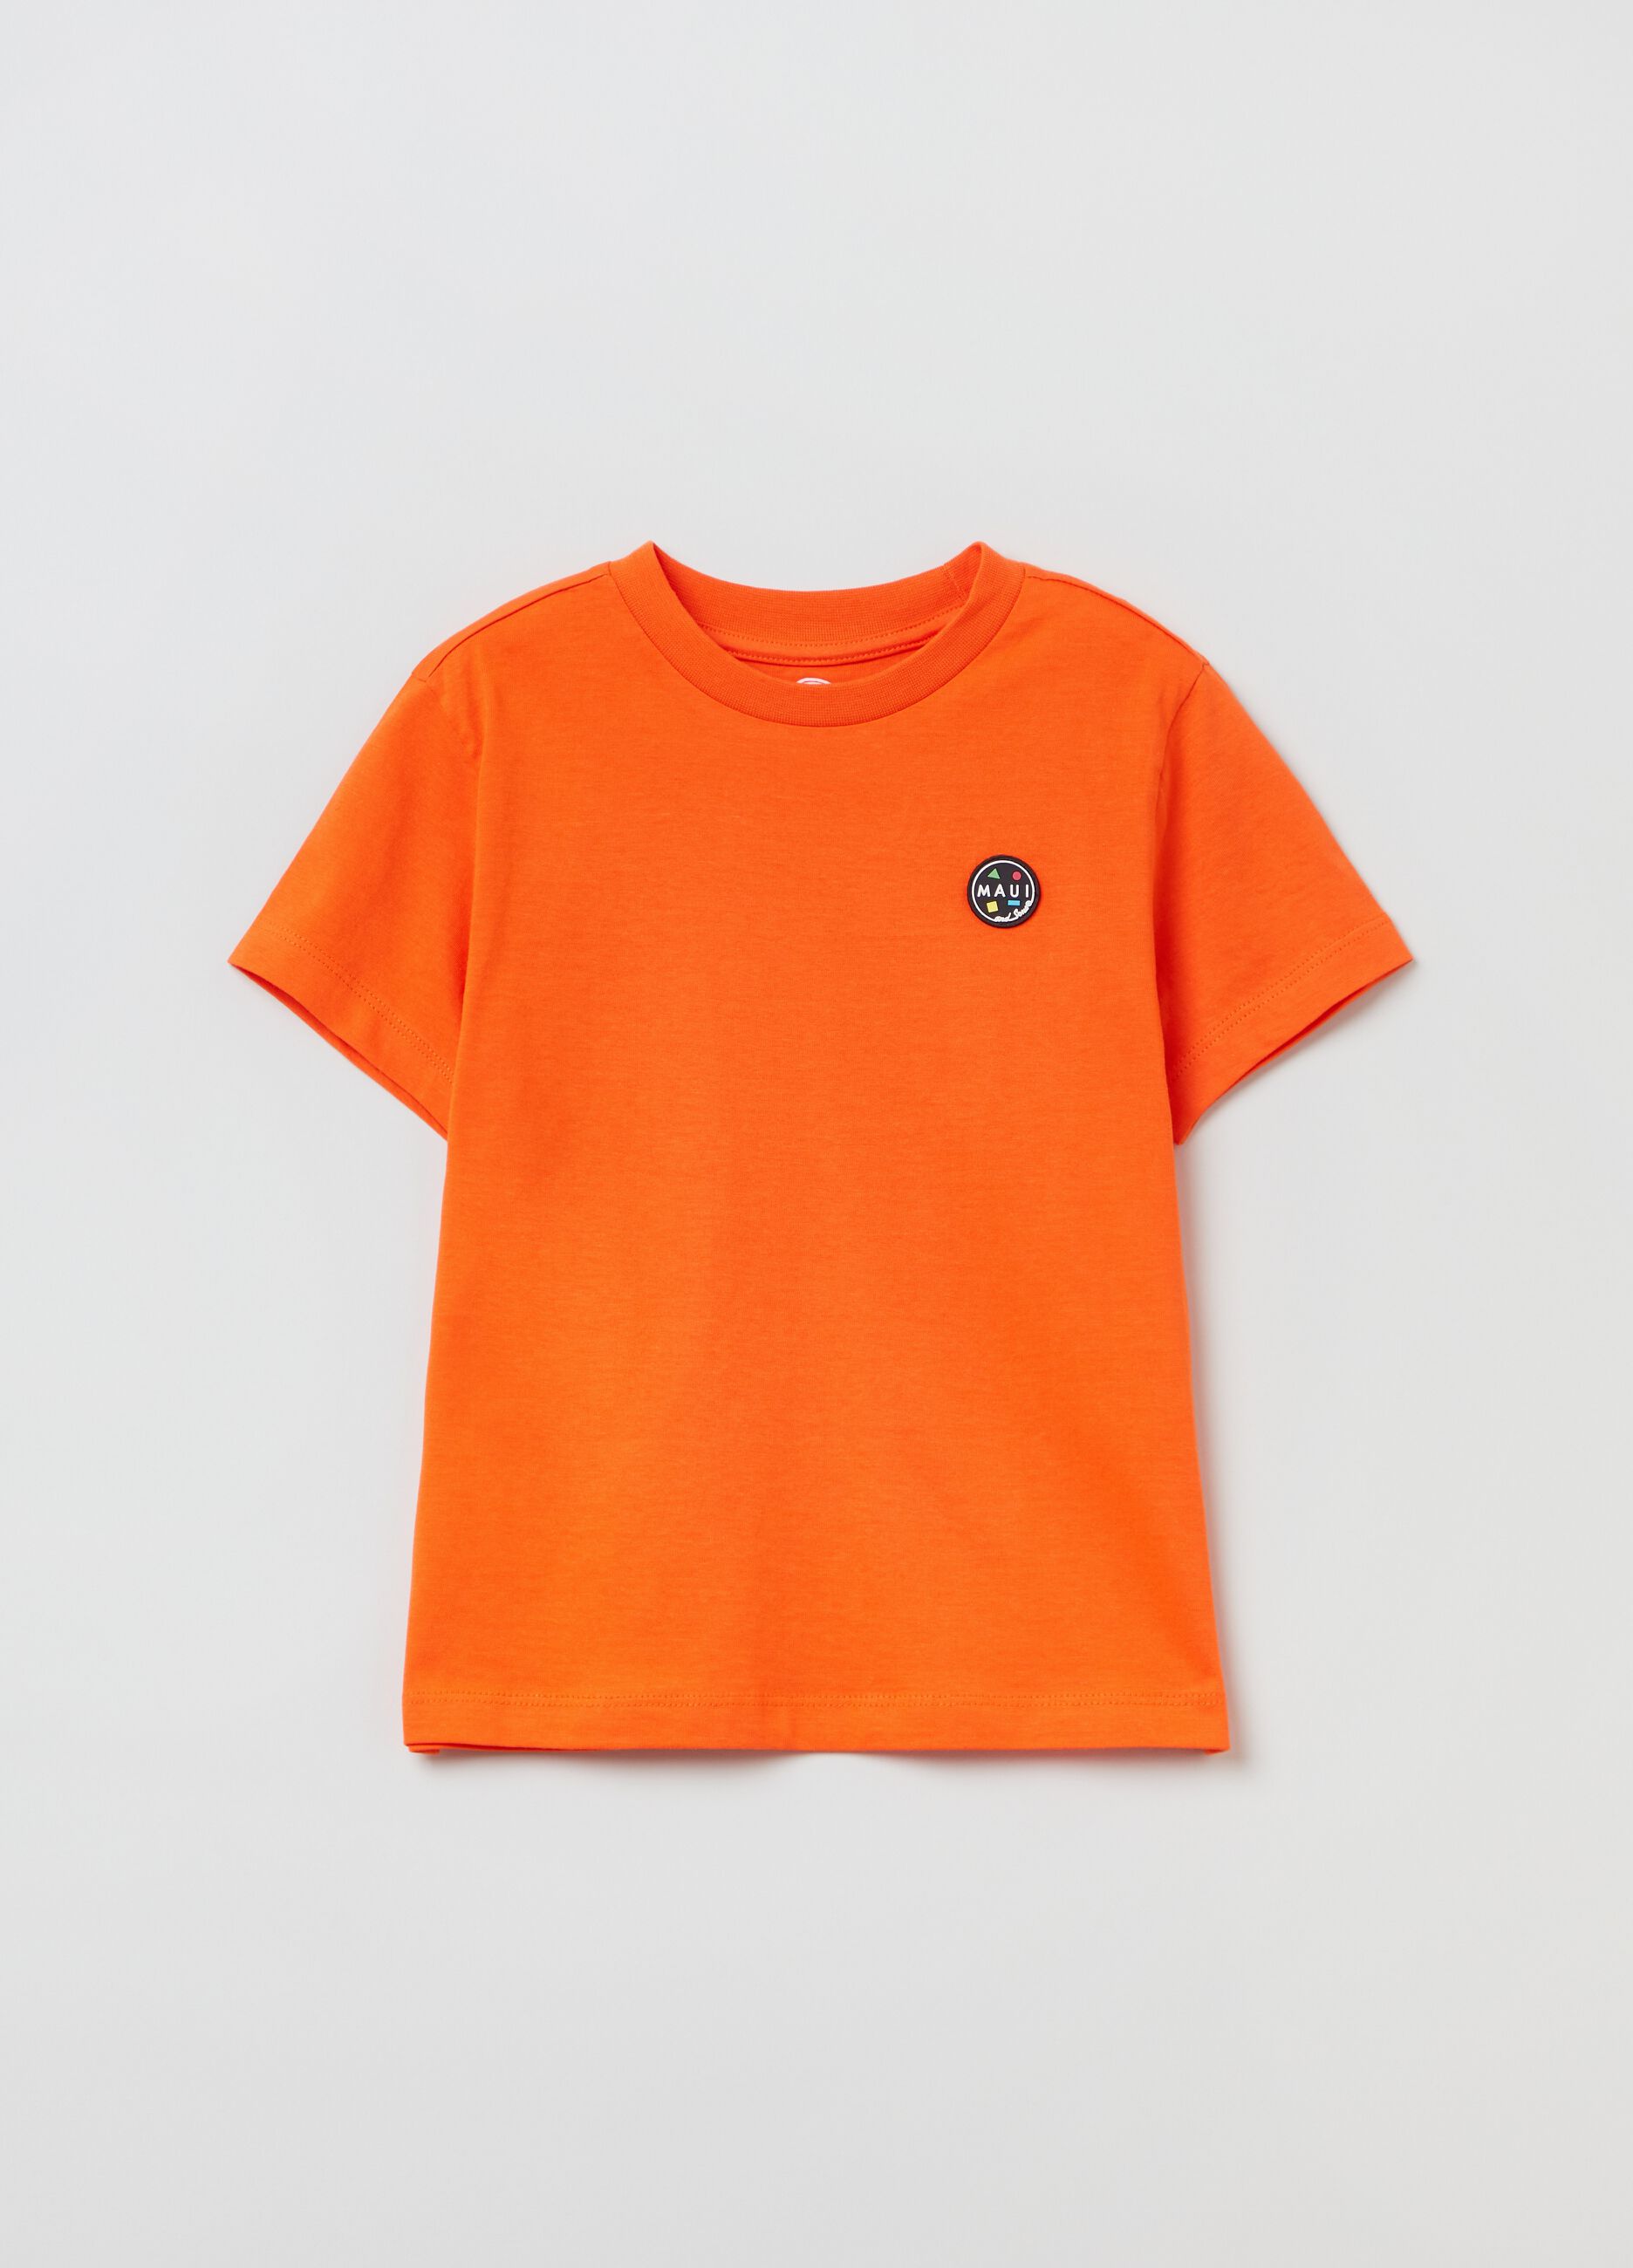 T-shirt with Maui and Sons logo patch